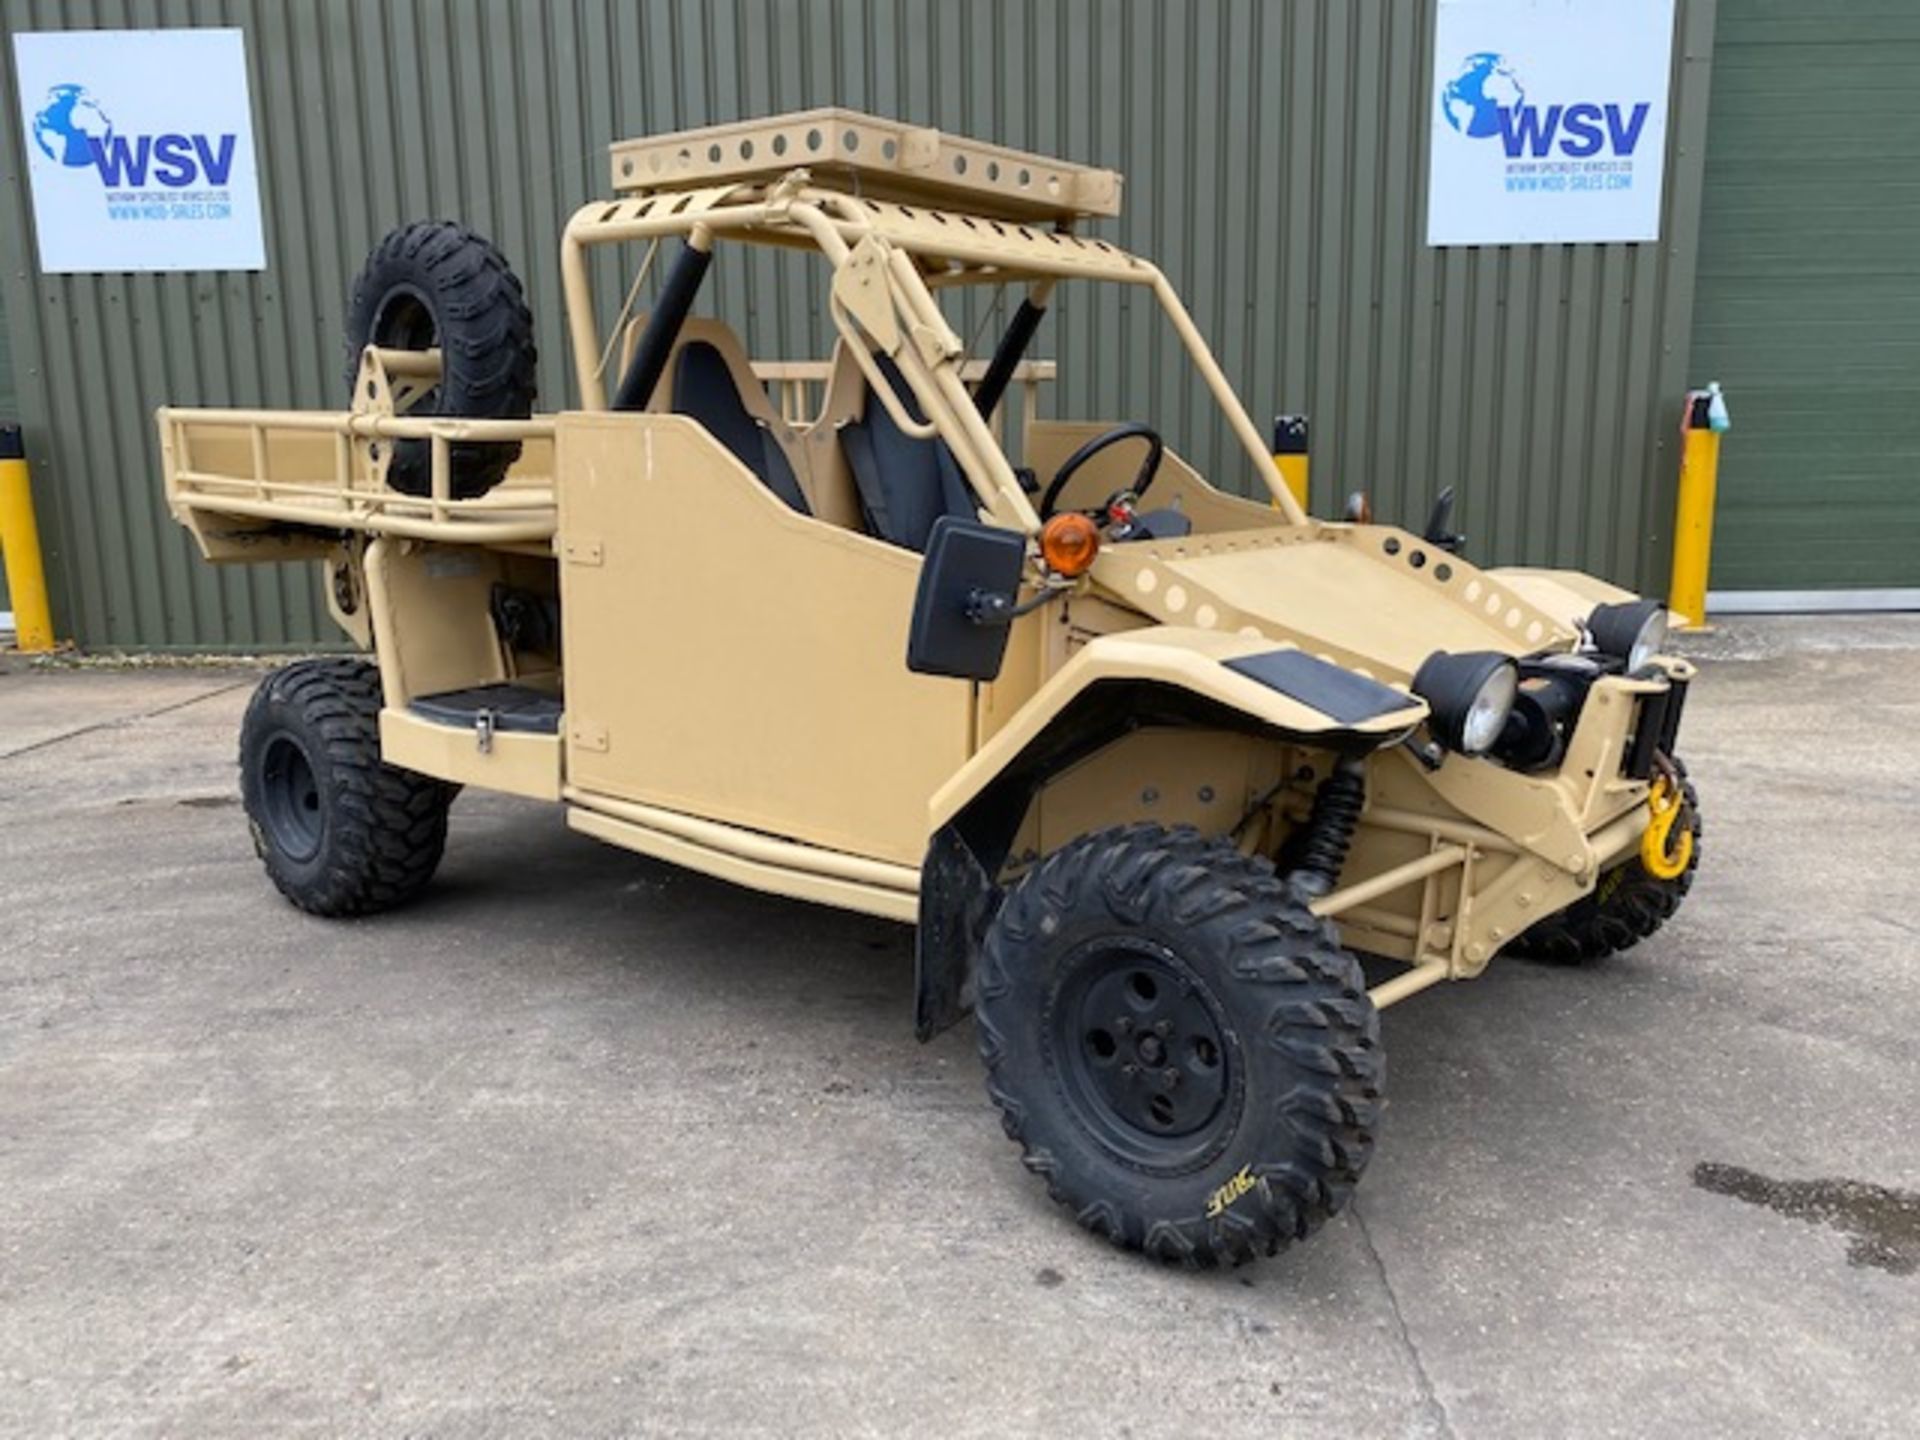 Enhanced Protection Systems (EPS) Springer ATV Only 717 Kms ex Reserve MOD - Image 20 of 42